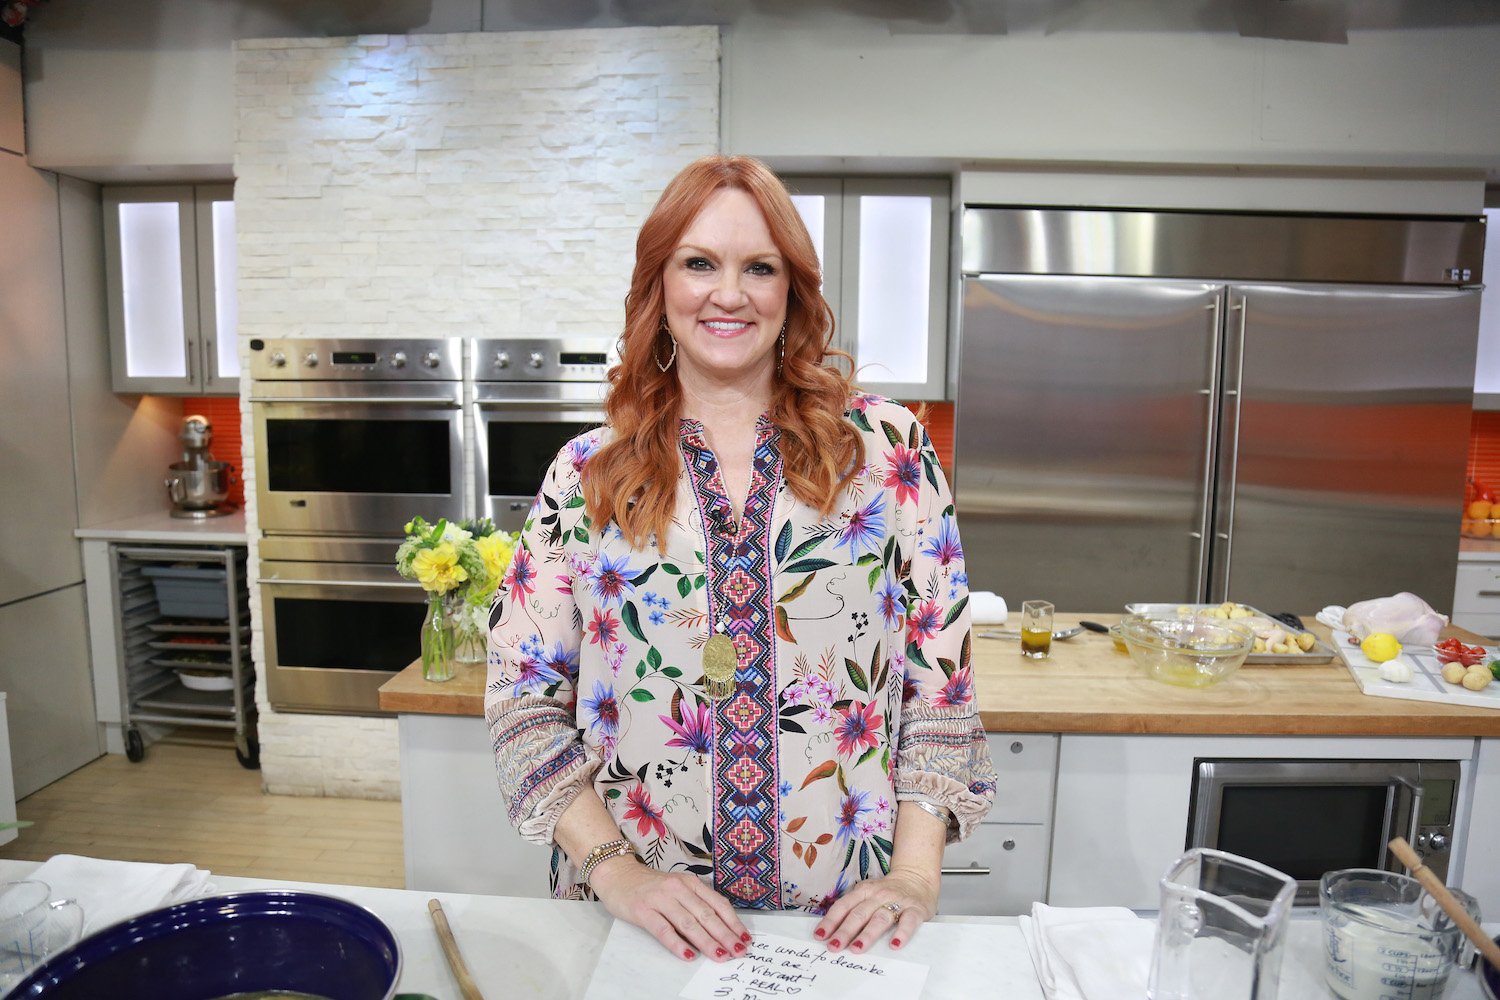 'The Pioneer Woman' star Ree Drummond wears a bright floral shirt and smiles on the set of 'Today' in 2019